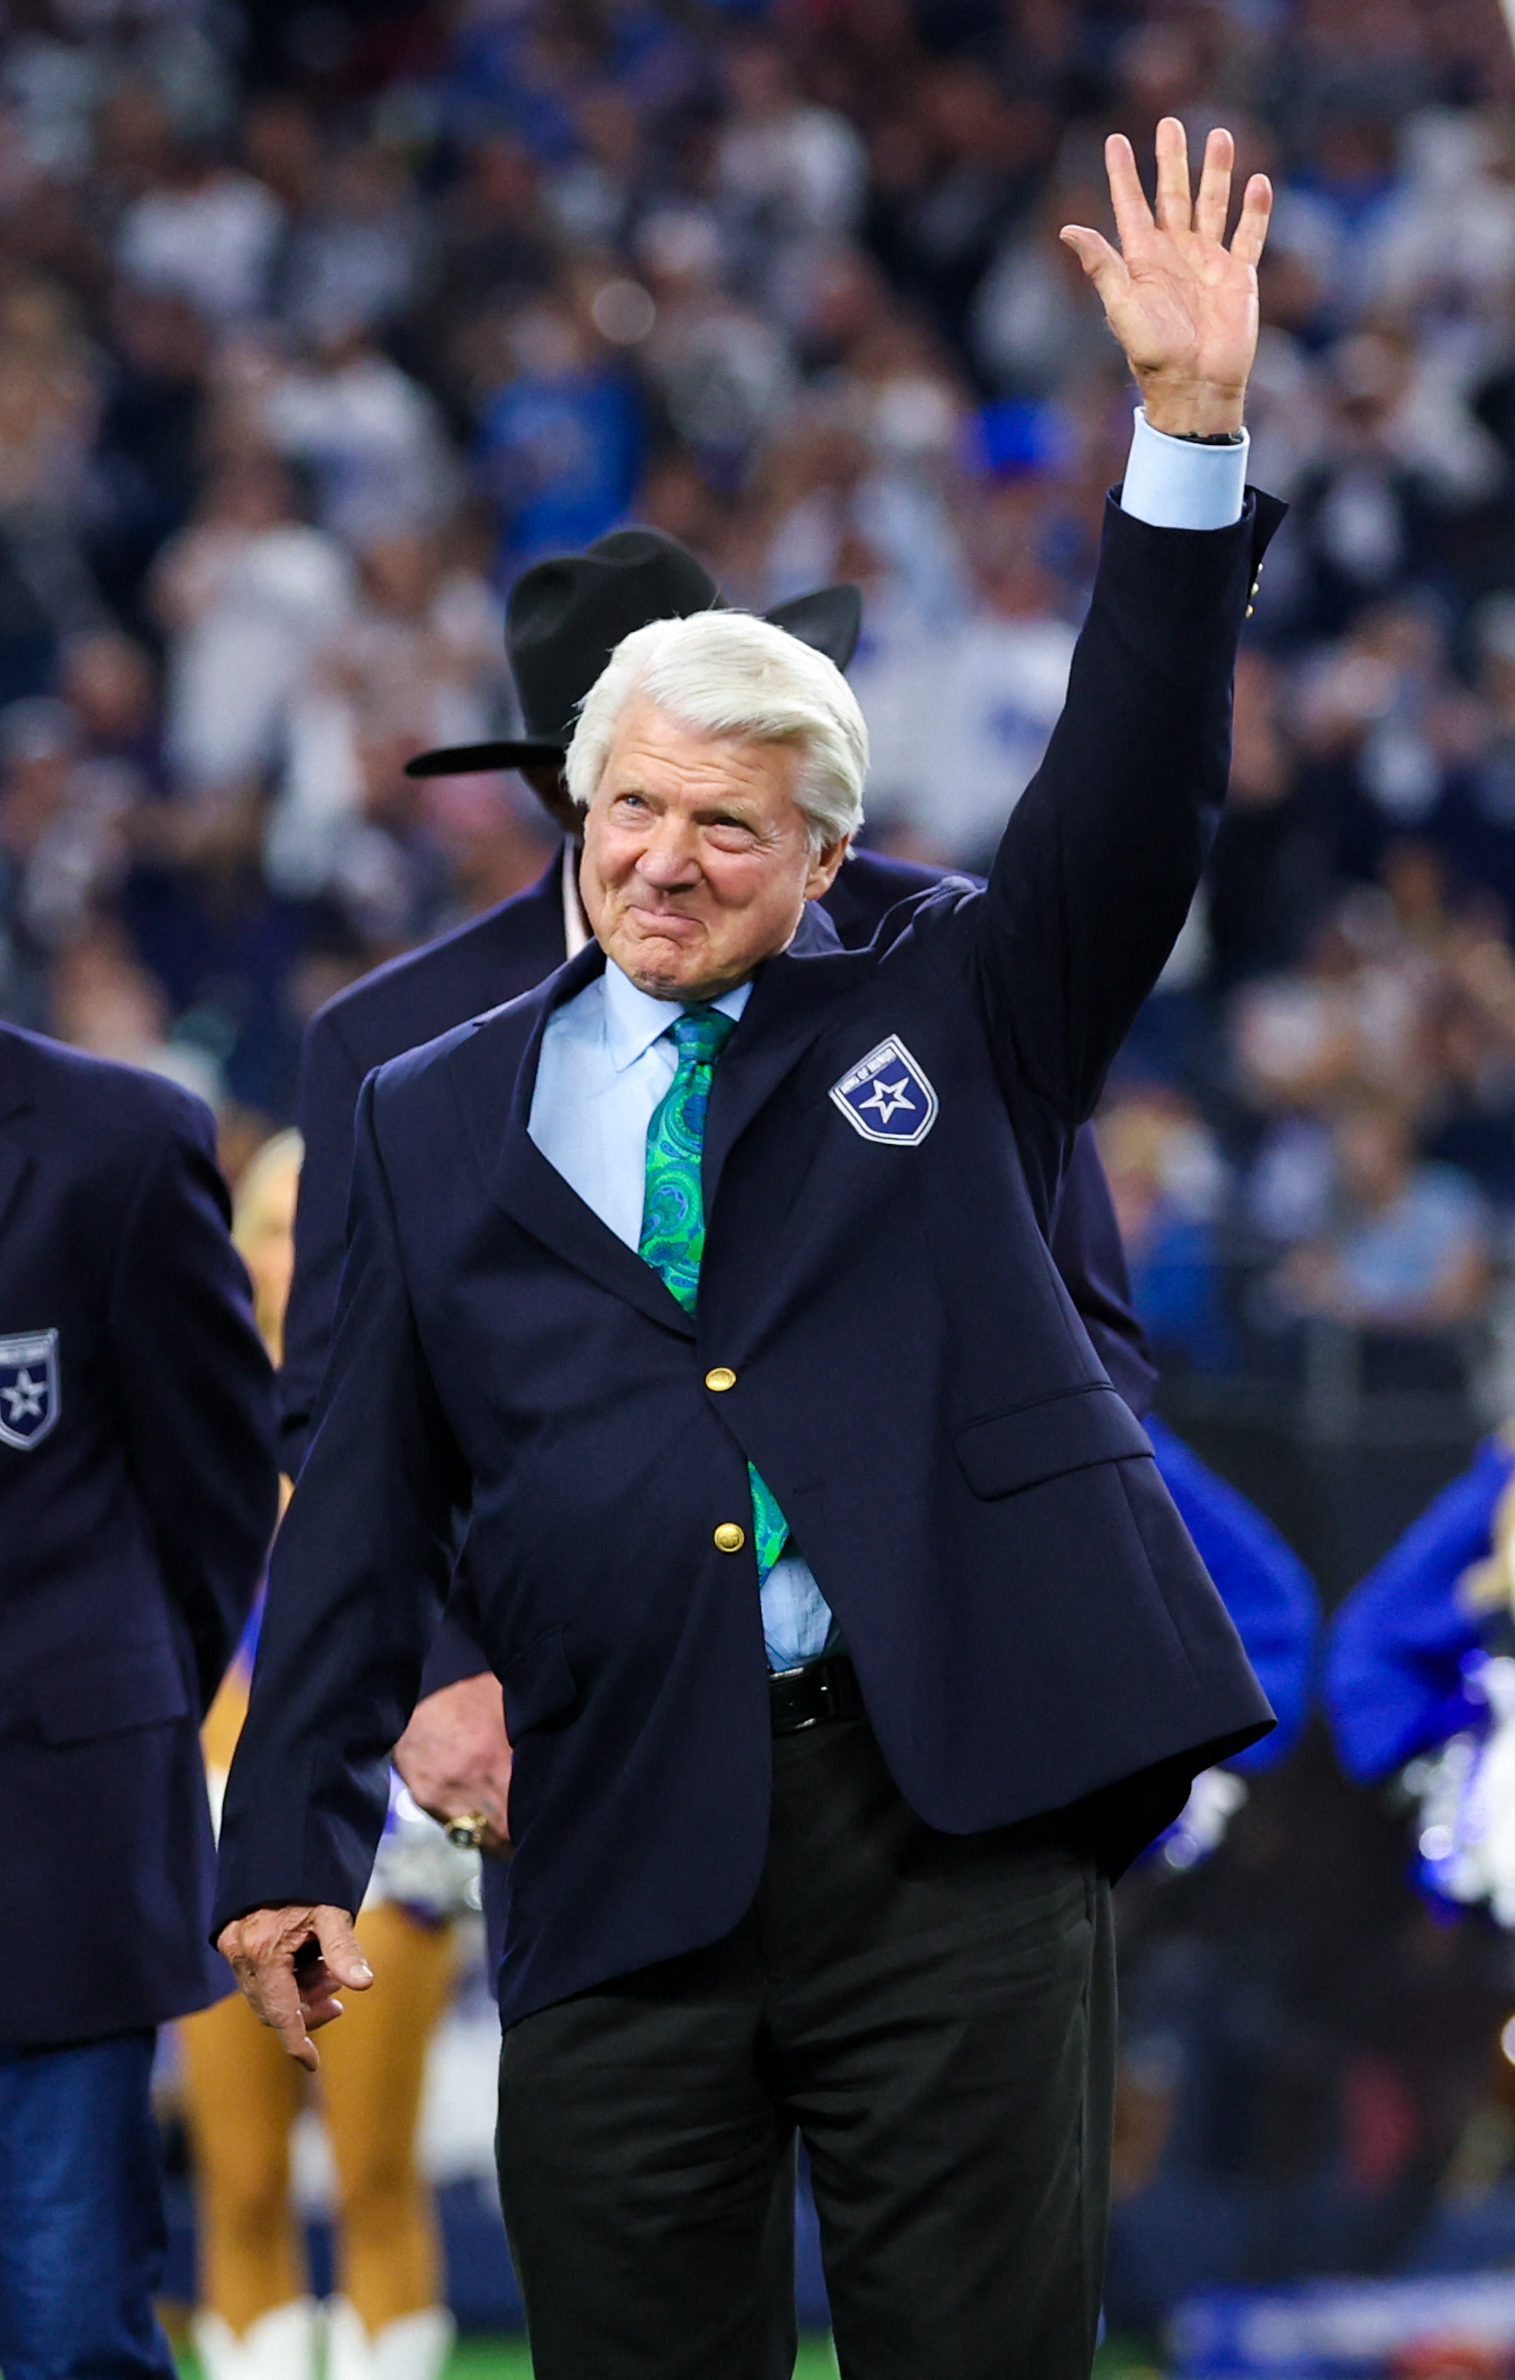 Michael's Fox NFL Sunday analyst Jimmy Johnson received the Ring of Honor at the game on Saturday